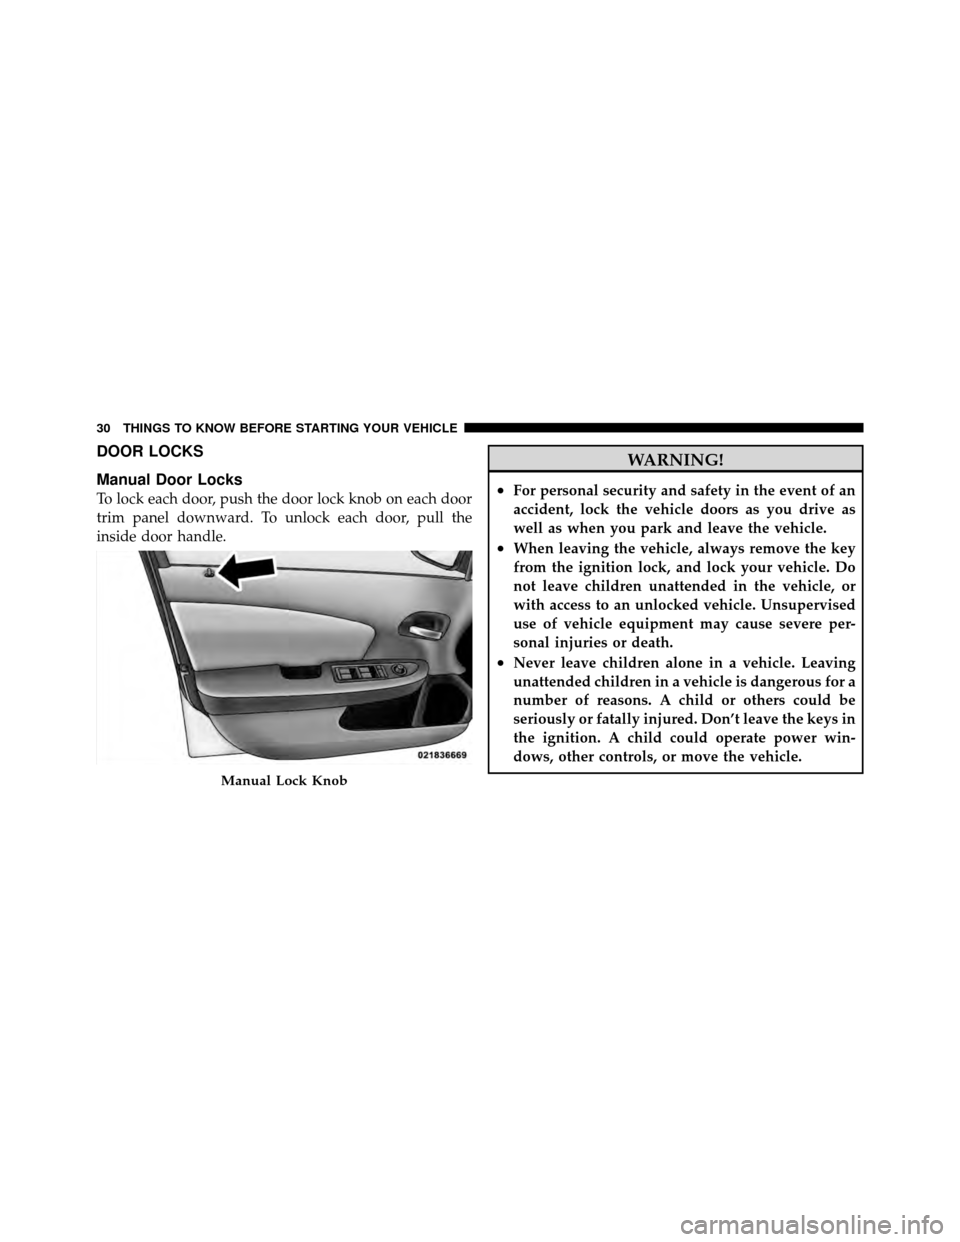 CHRYSLER 200 2011 1.G Owners Manual DOOR LOCKS
Manual Door Locks
To lock each door, push the door lock knob on each door
trim panel downward. To unlock each door, pull the
inside door handle.
WARNING!
•For personal security and safety